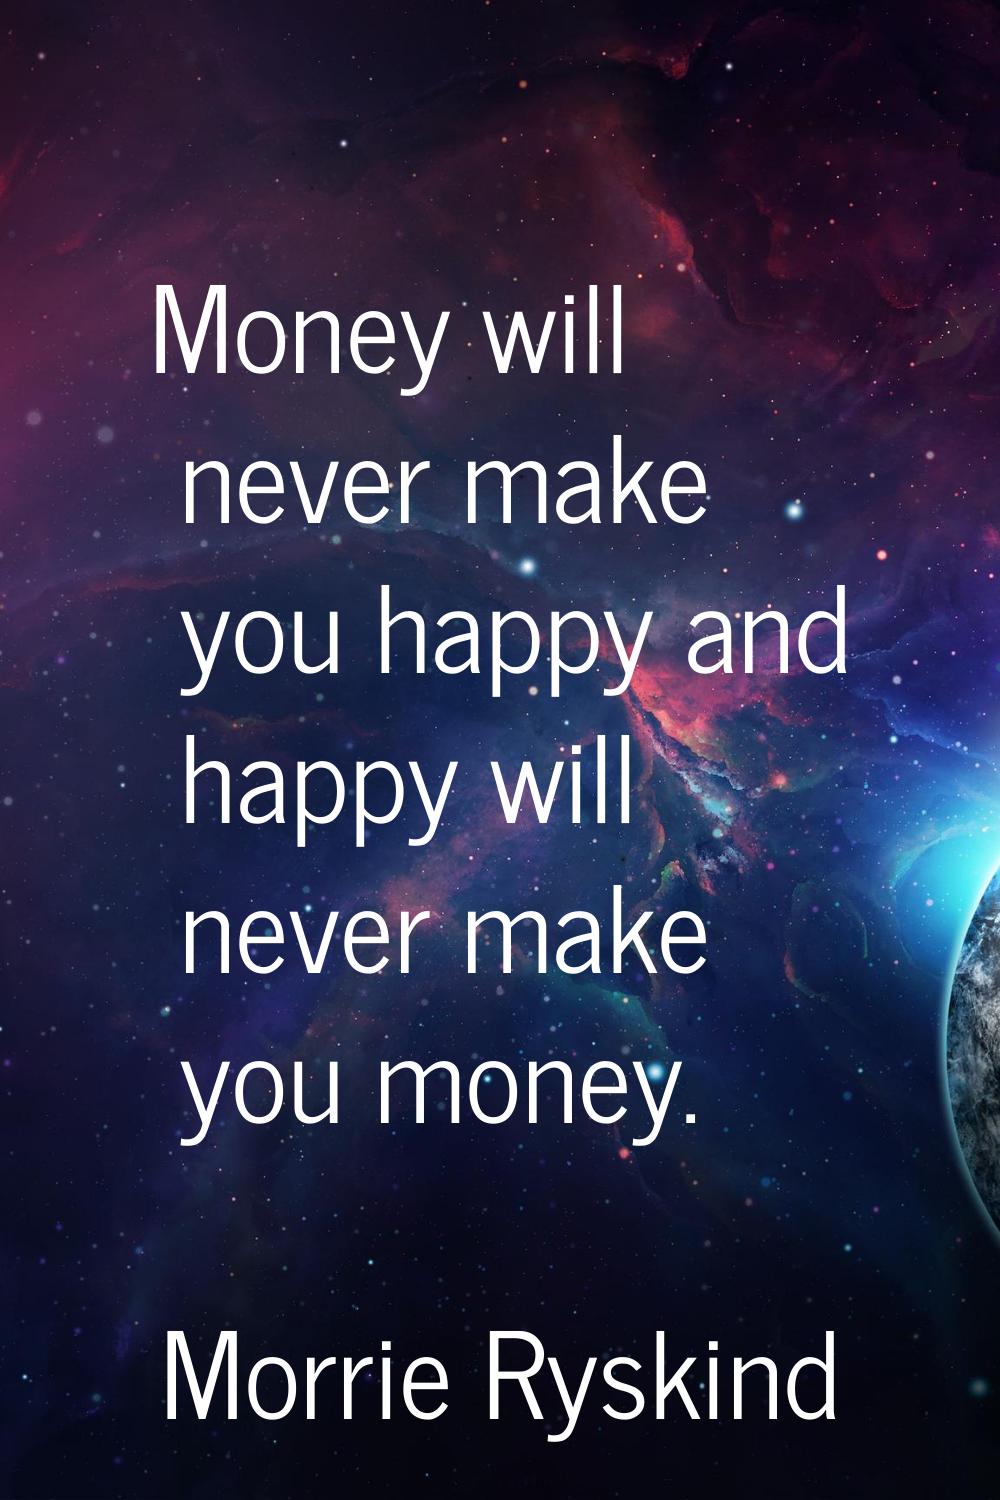 Money will never make you happy and happy will never make you money.